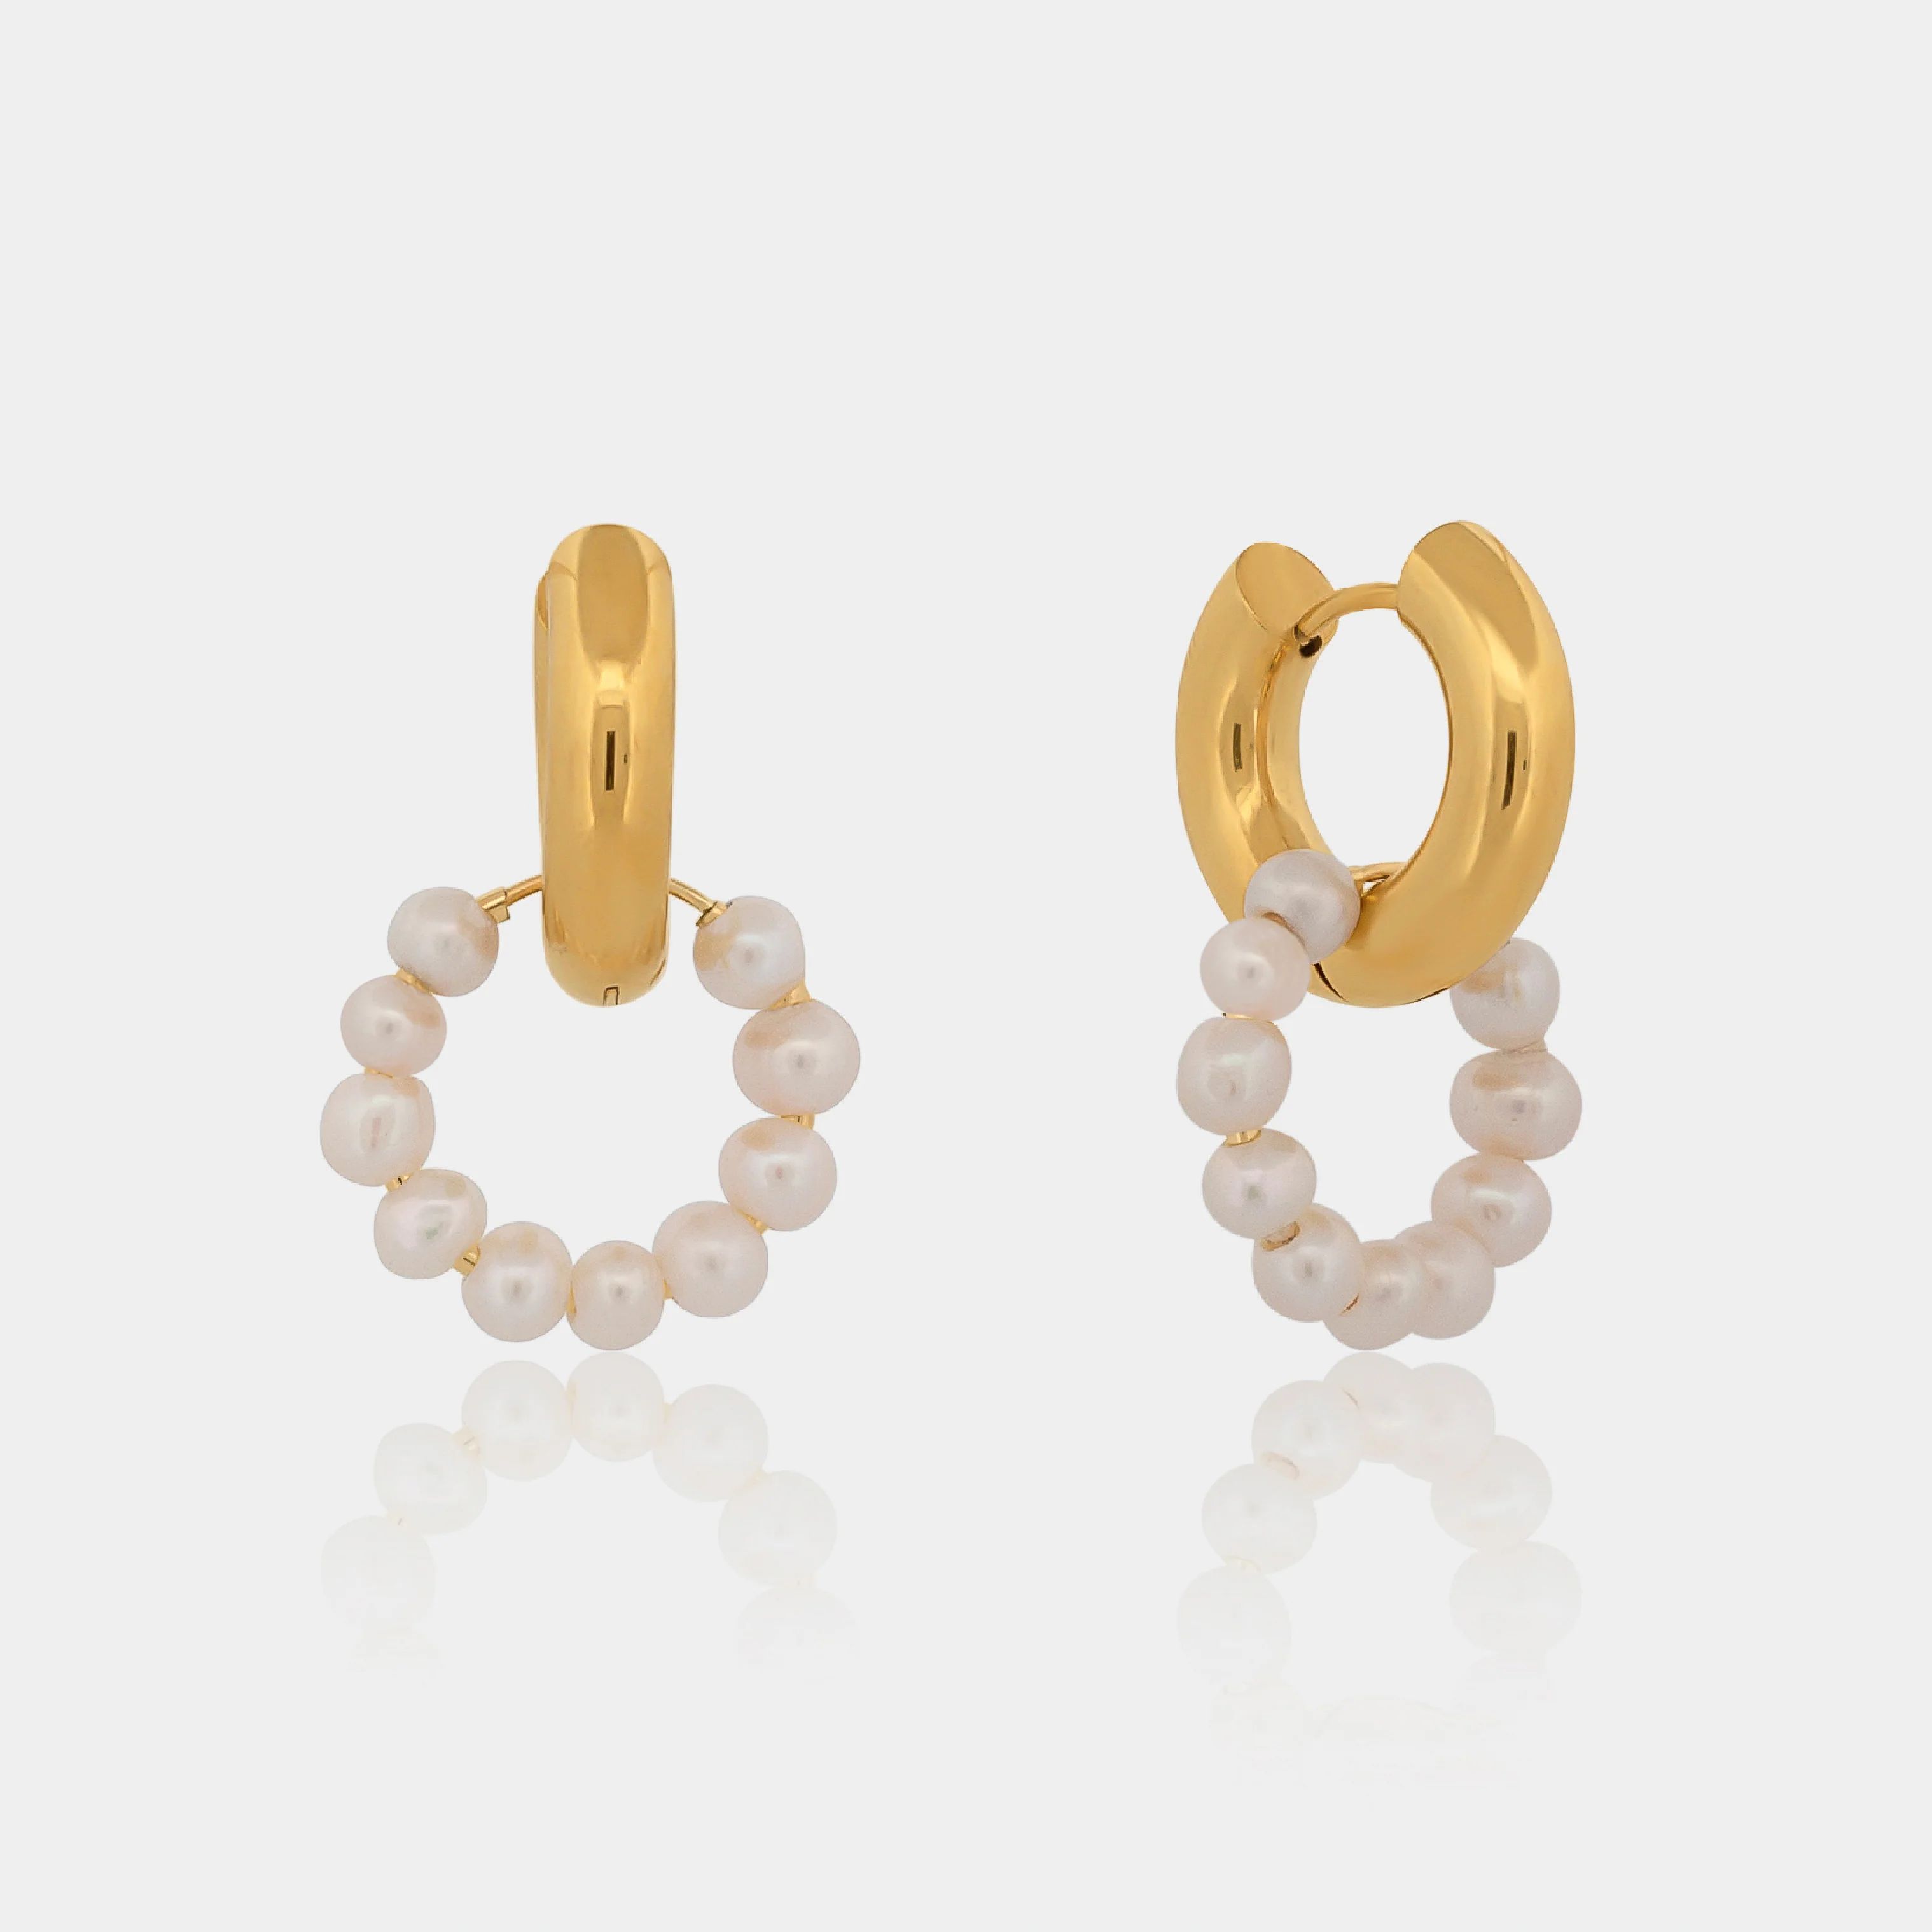 Convertible Gold & Pearl Hoops | LINK'D THE LABEL